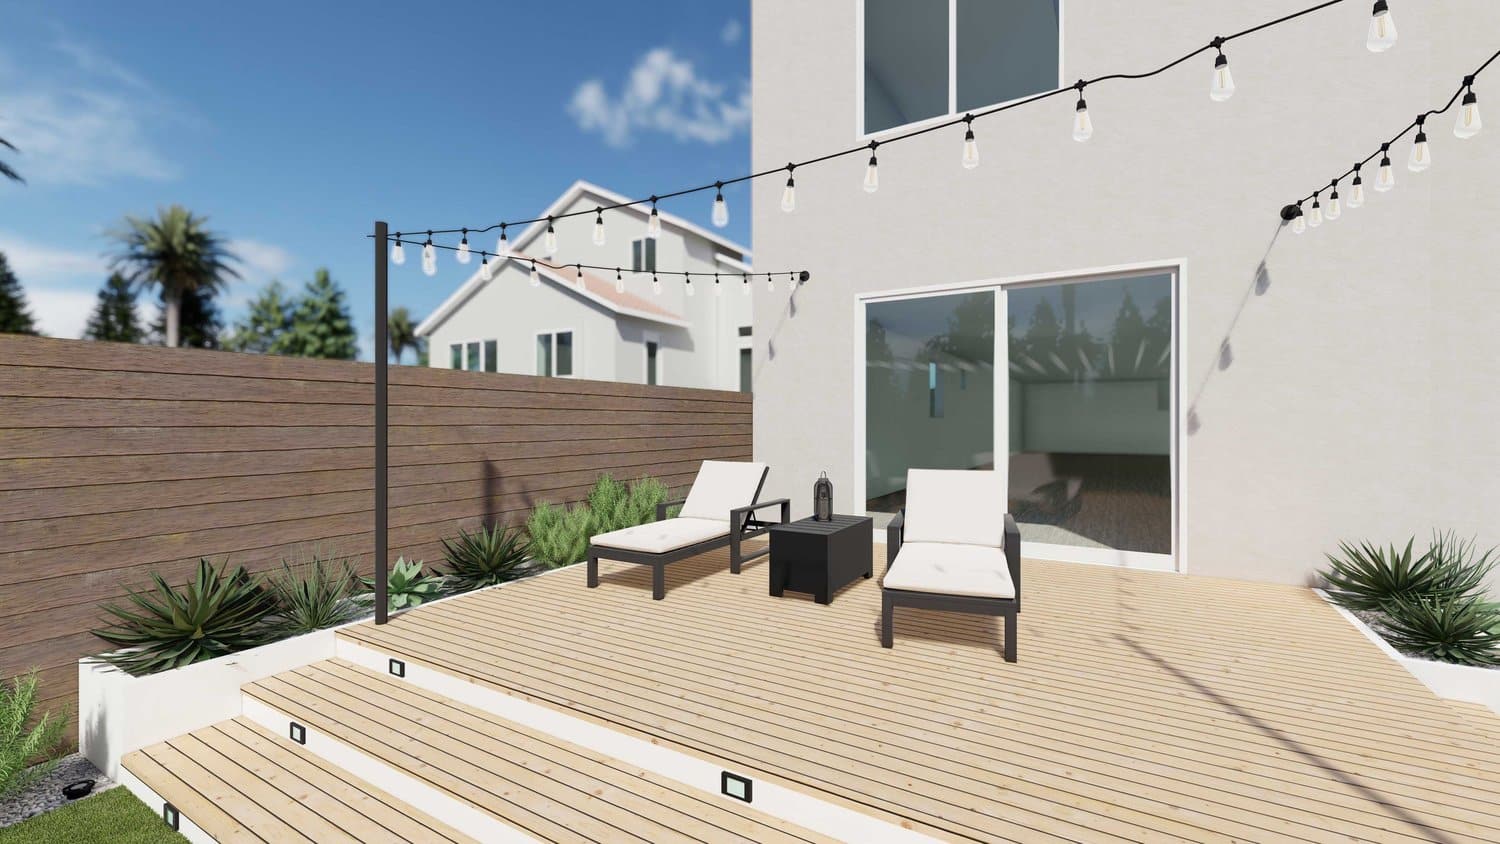 Los Angeles outdoor deck and patio area with lounge sets and string lights, alongside boxed plants and fence